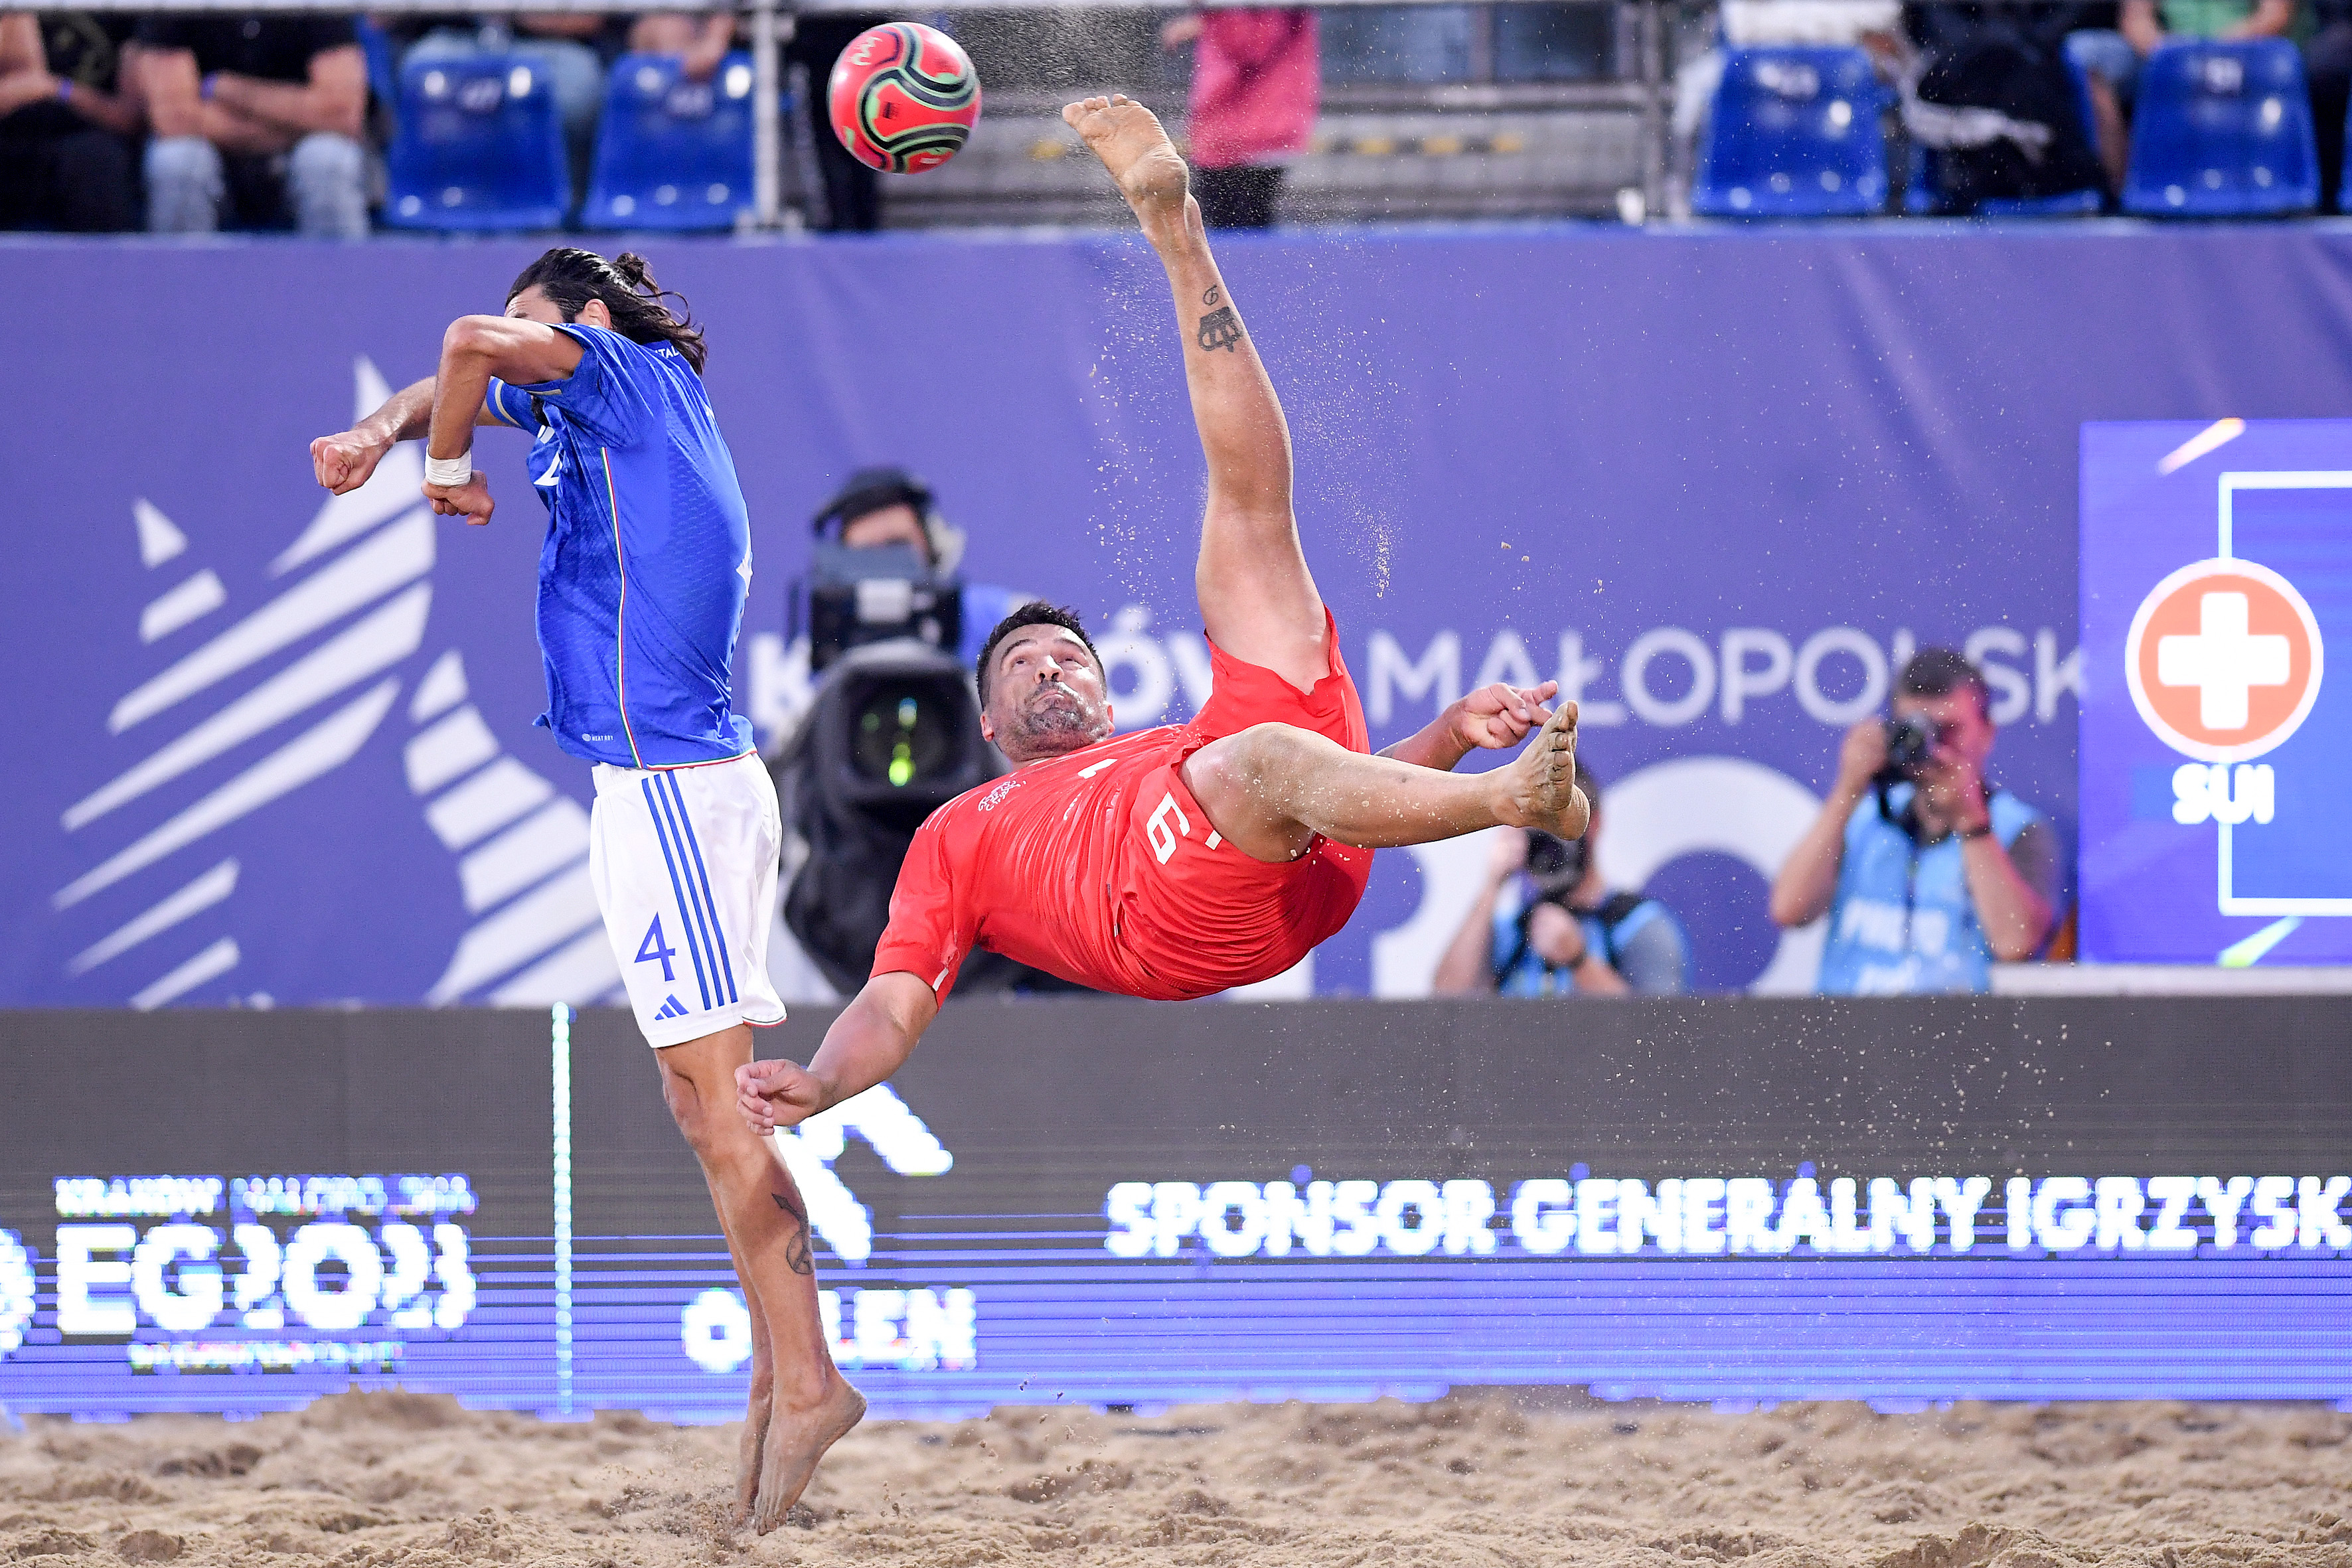 Penalty shoot-out drama in beach soccer medal matches